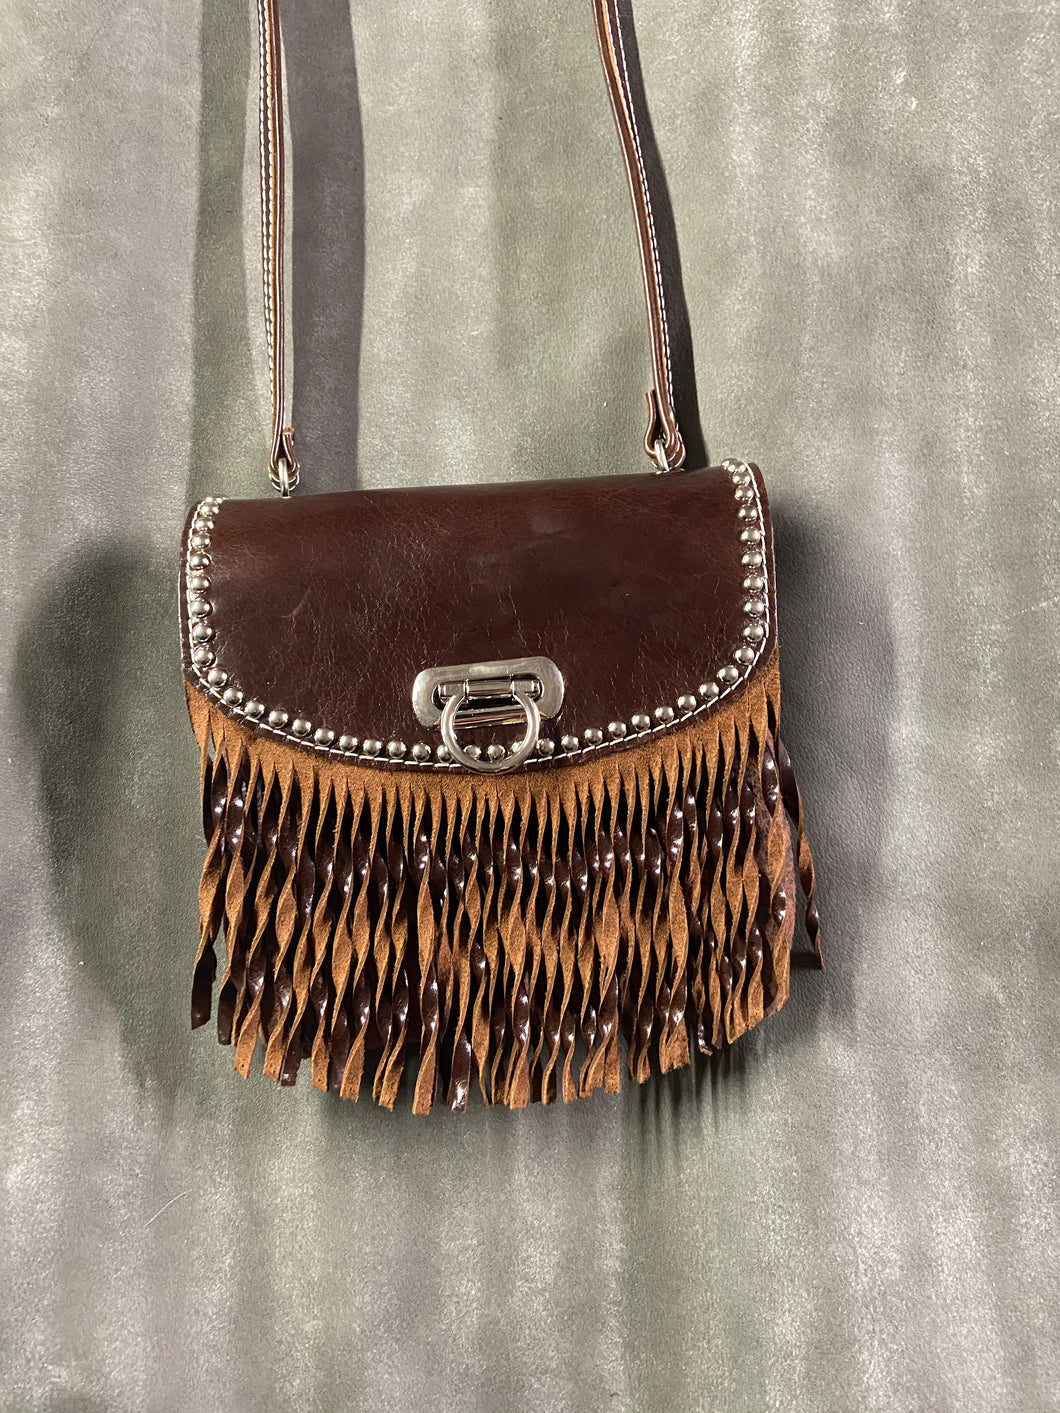 Two-Tone Brown Pocket Purse with Curly Fringe